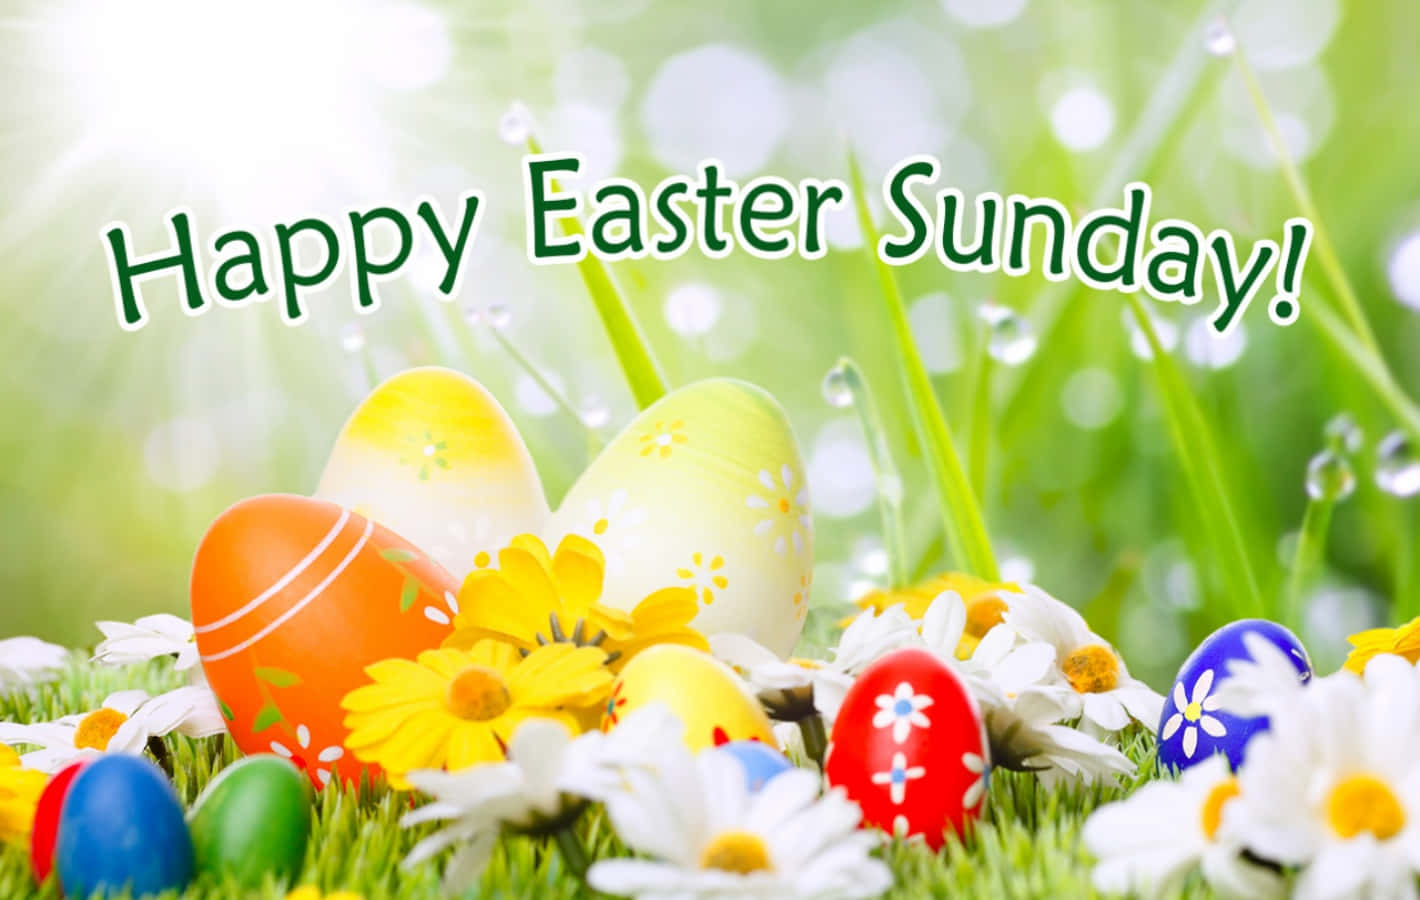 Celebrate a Blessed Easter